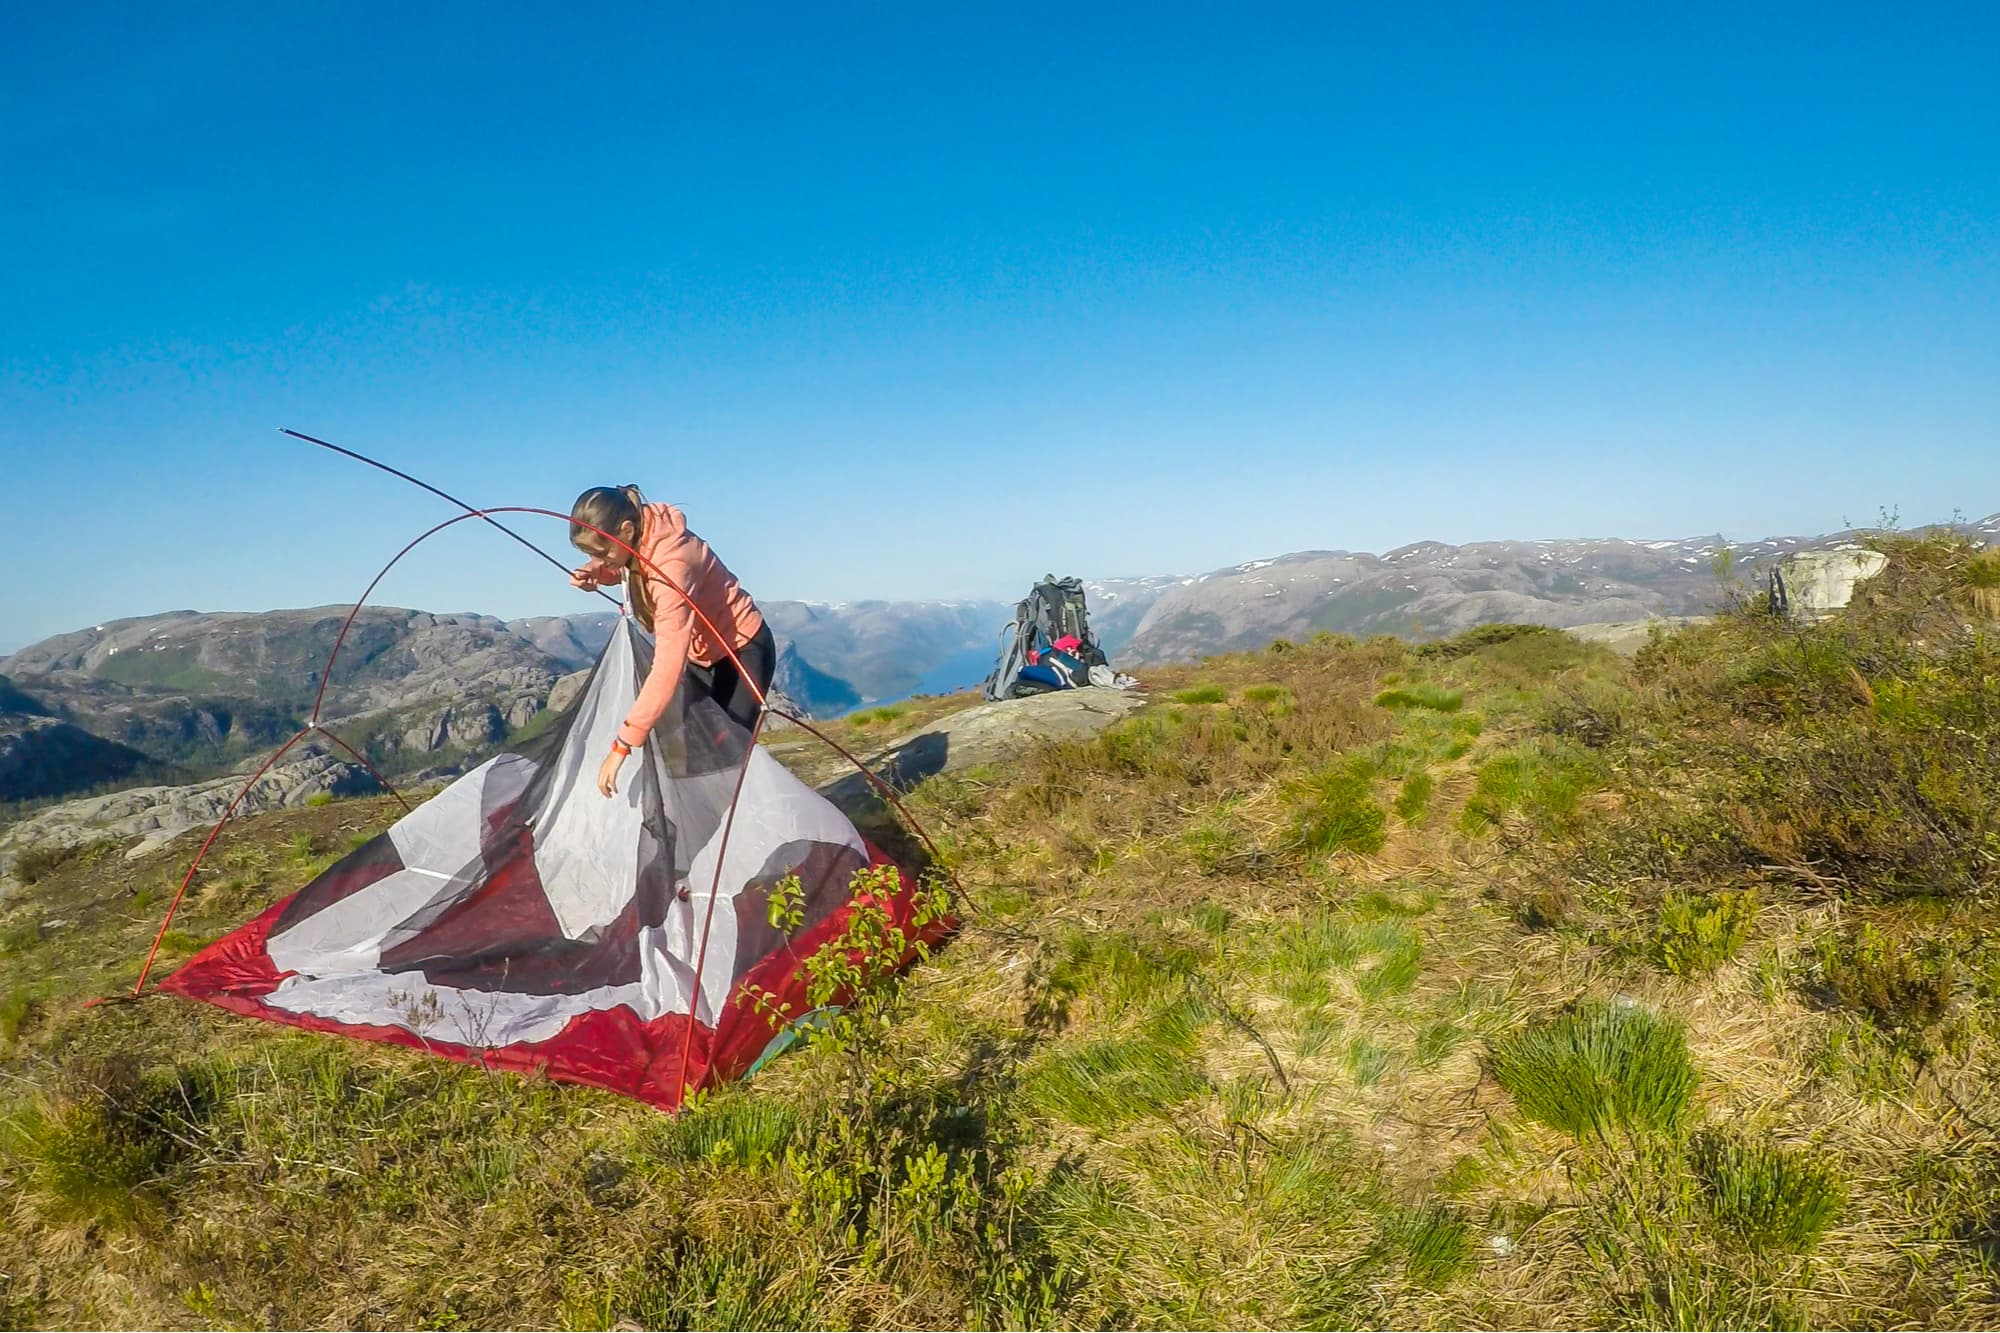 a woman struggling to set up a tent on a bald near a cliff